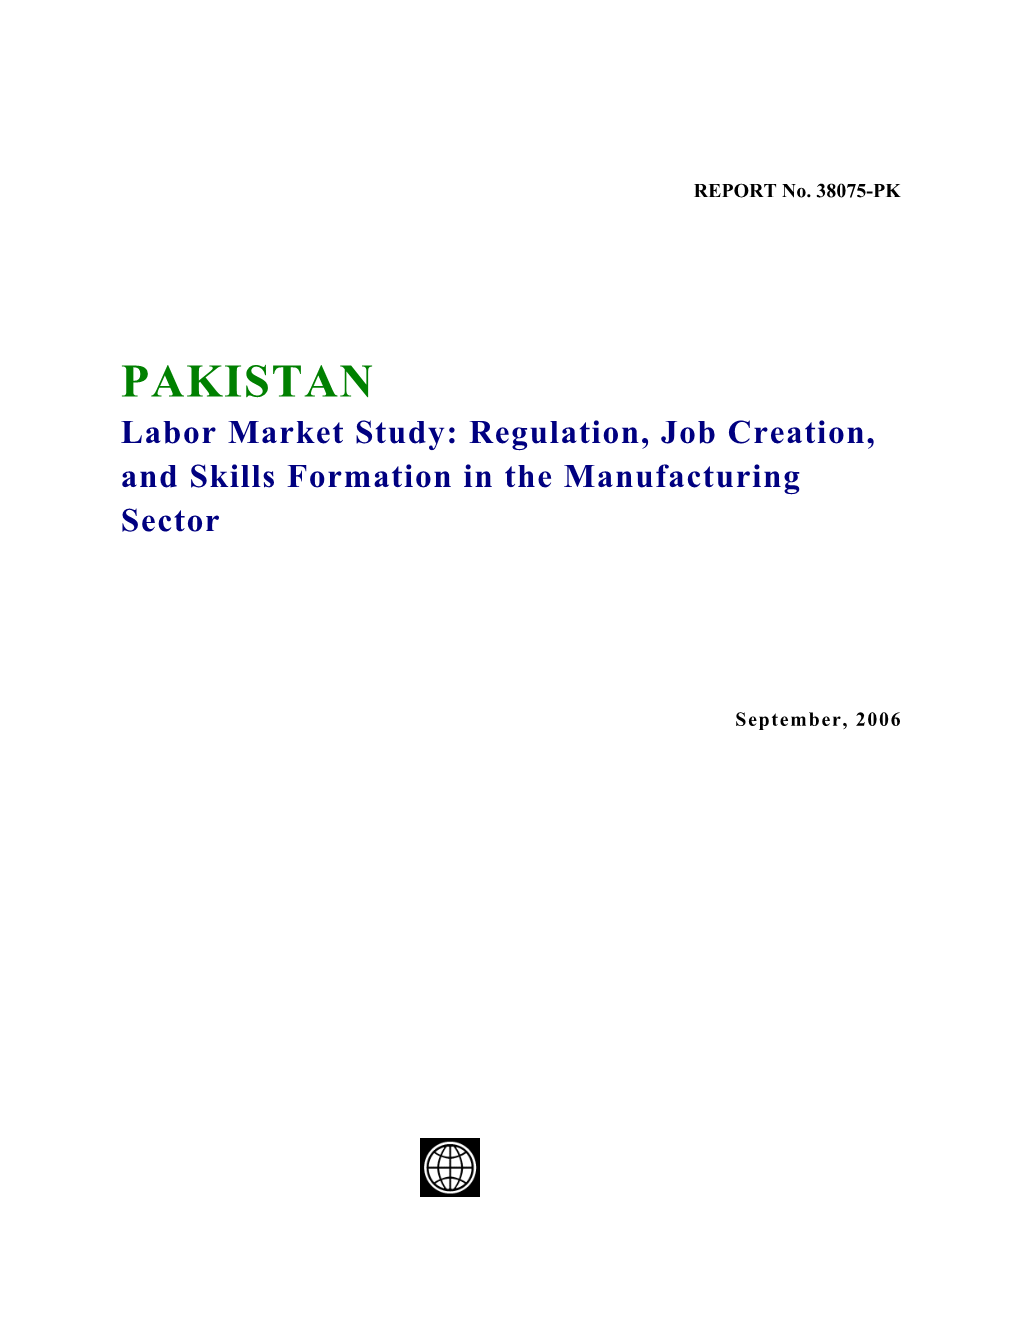 Labor Market Study: Regulation, Job Creation, and Skills Formation in the Manufacturing Sector